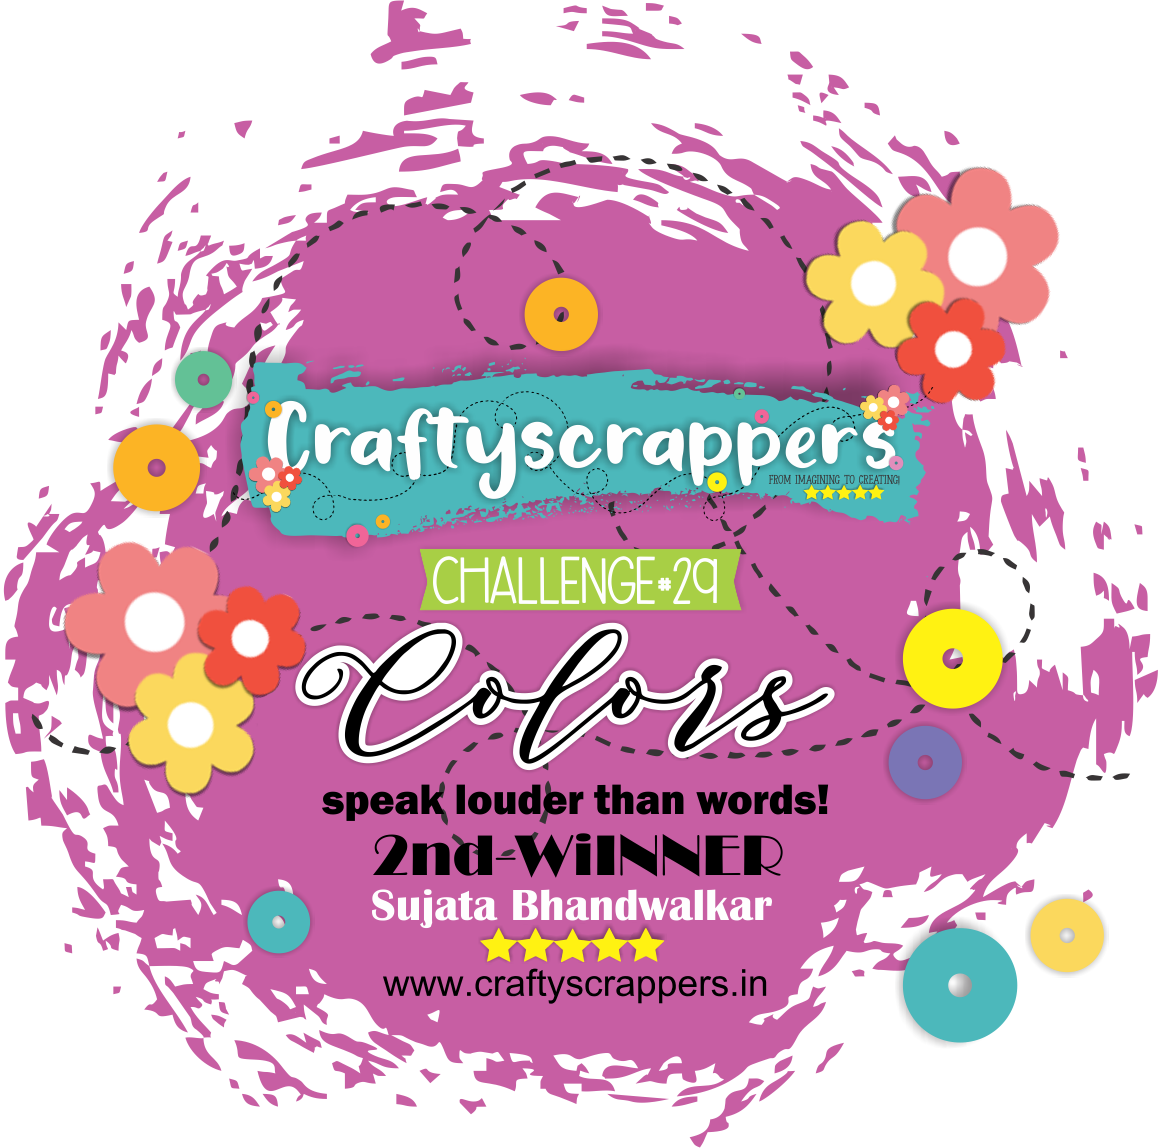 Second winner at Craftyscrappers challeng 29